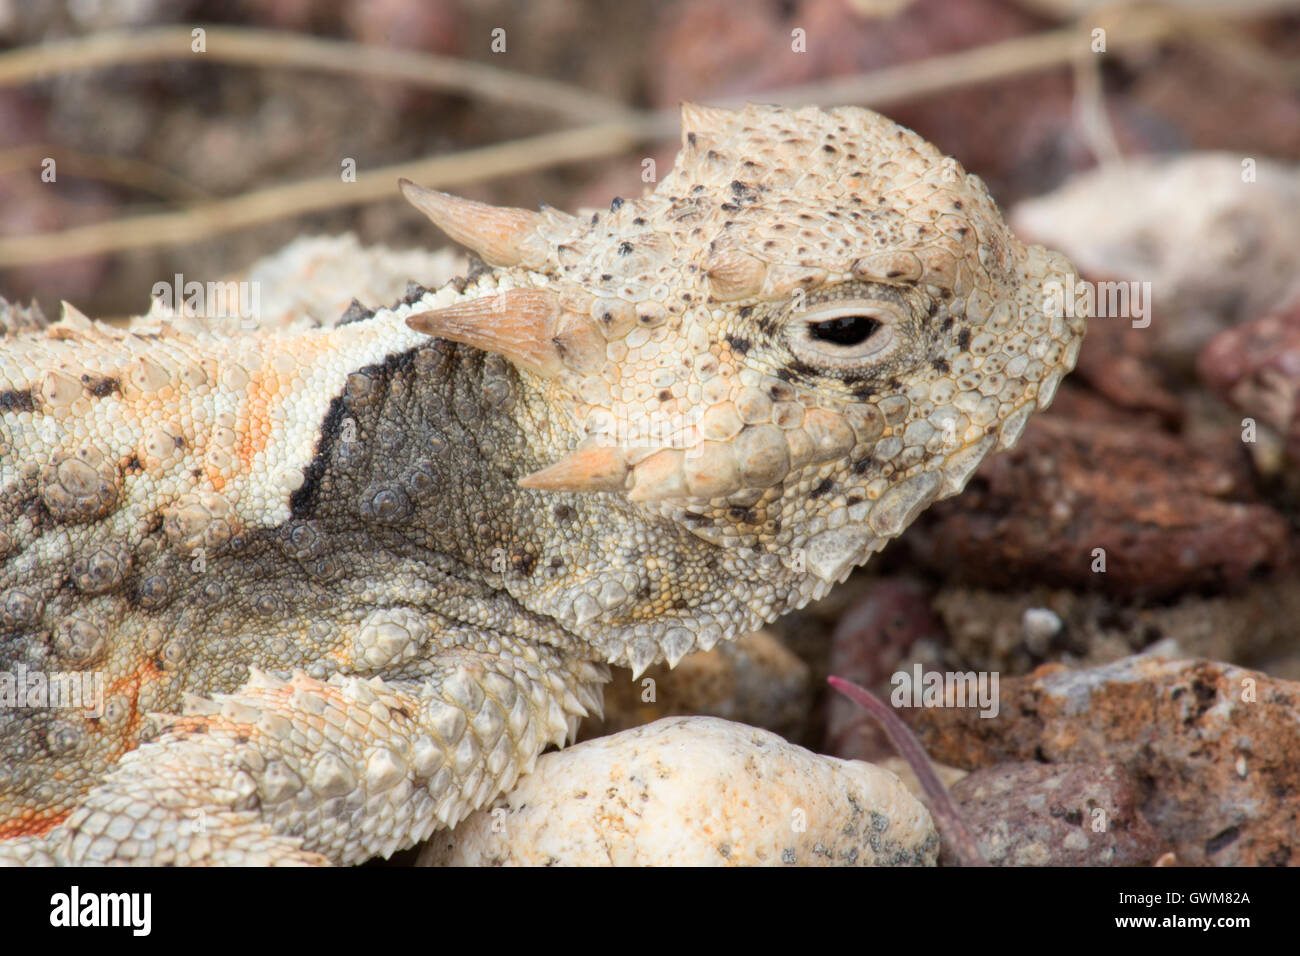 Horned toad, Calico Mountains Wilderness, Black Rock Desert High Rock Canyon Emigrant Trails National Conservation Area, Nevada Stock Photo